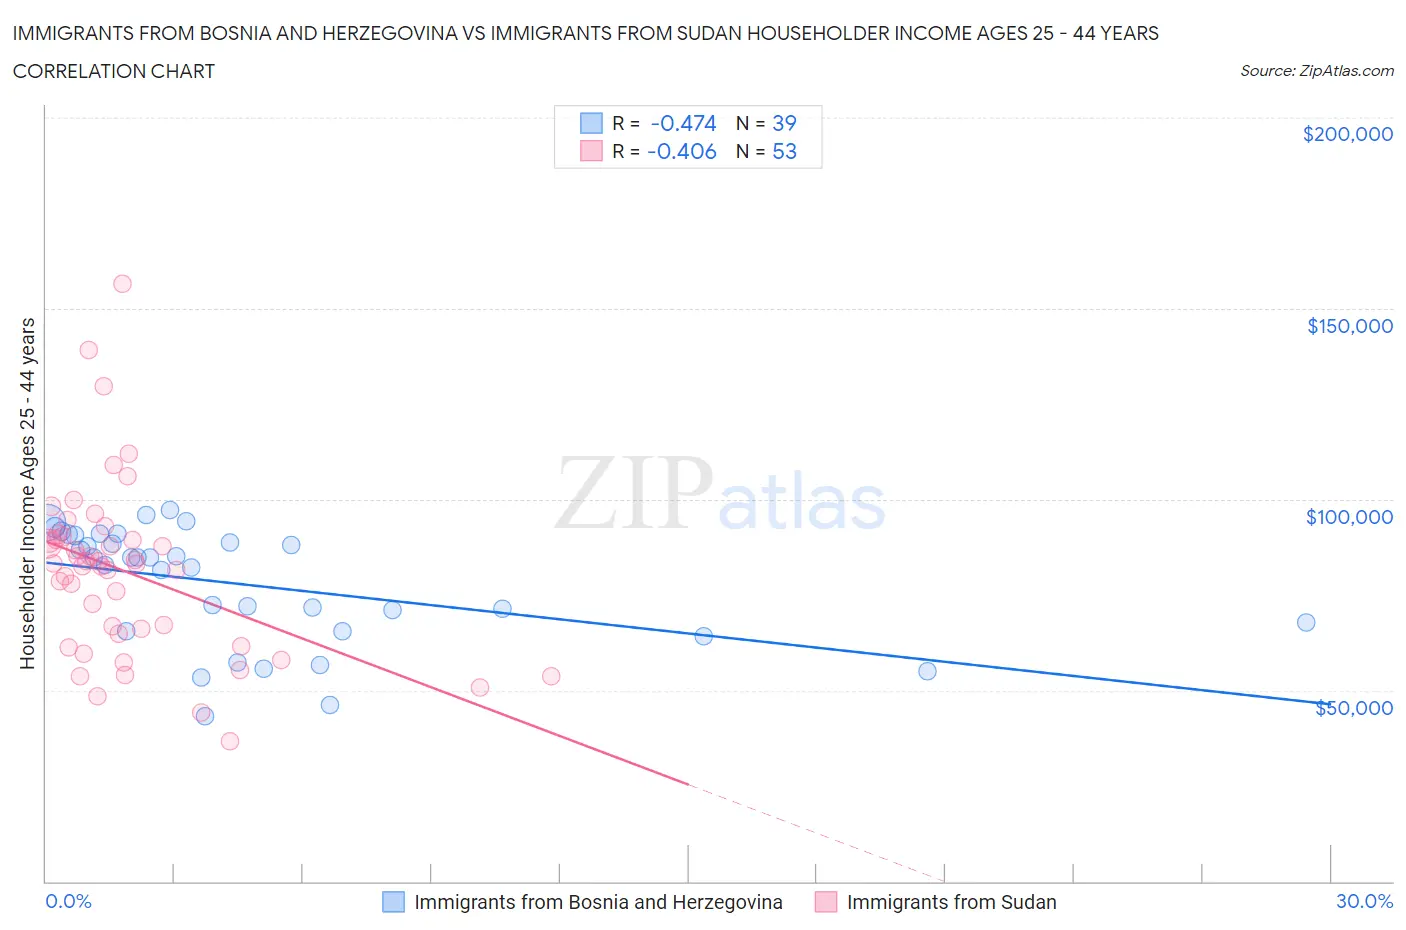 Immigrants from Bosnia and Herzegovina vs Immigrants from Sudan Householder Income Ages 25 - 44 years